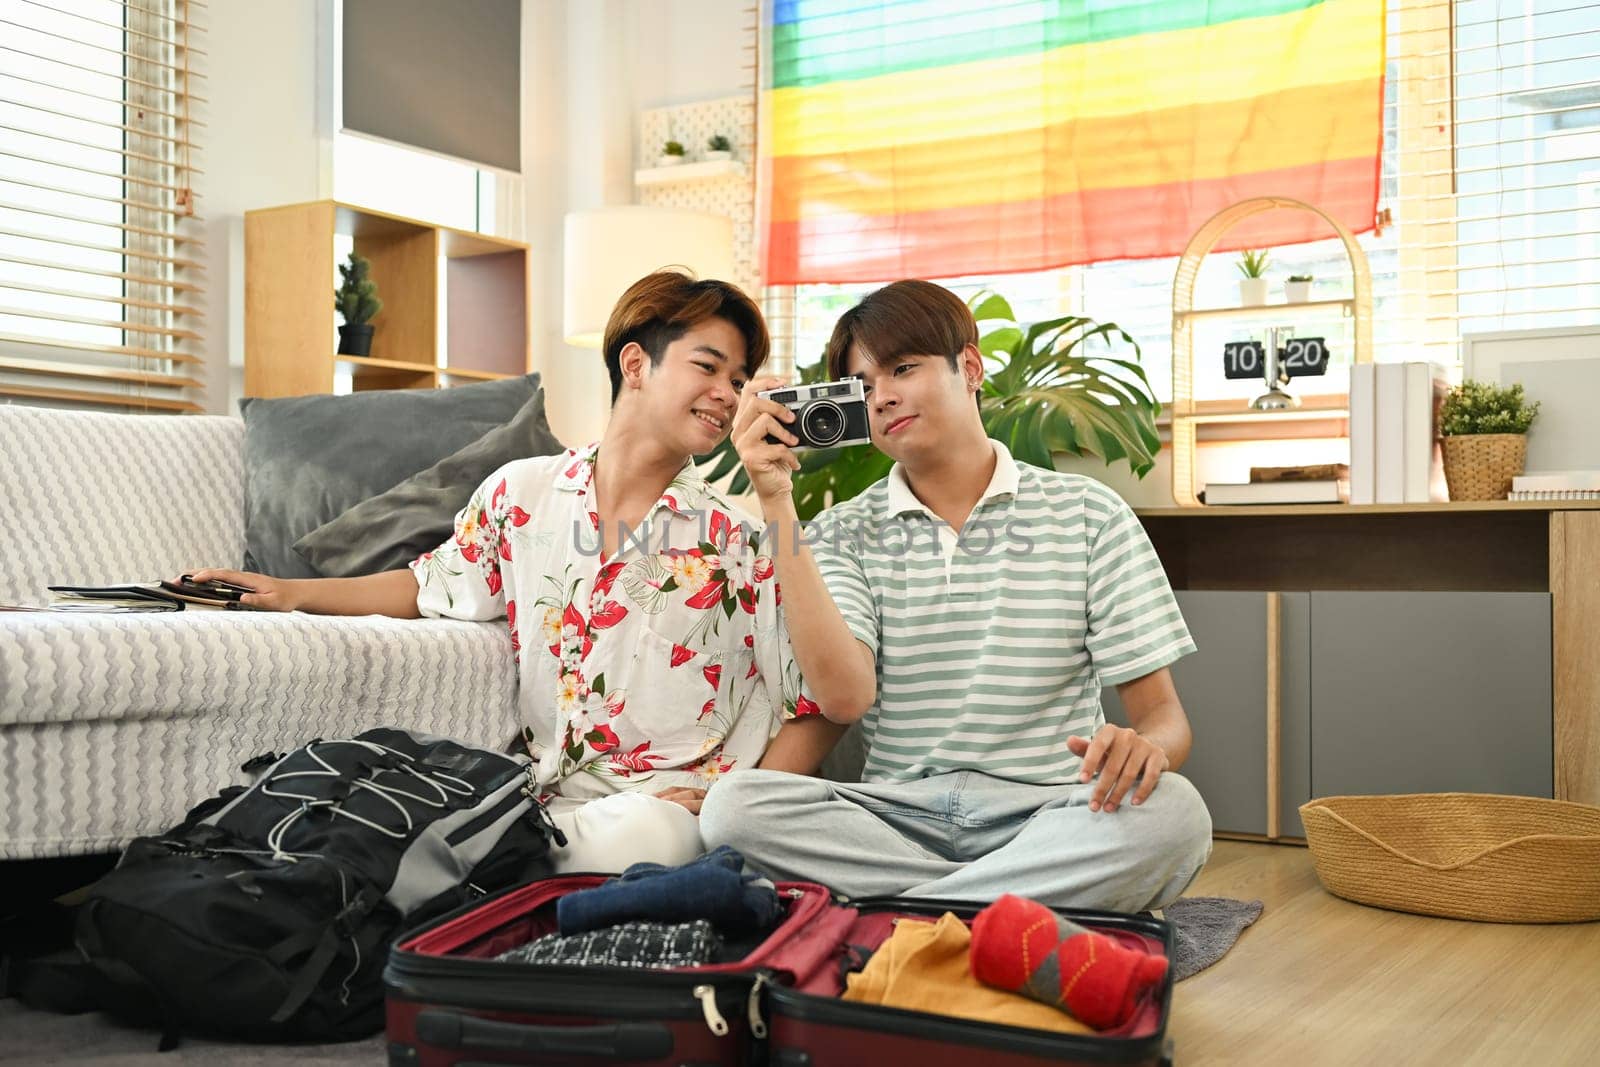 Smiling homosexual couple sitting on floor in living room and packing clothes into travel bag by prathanchorruangsak